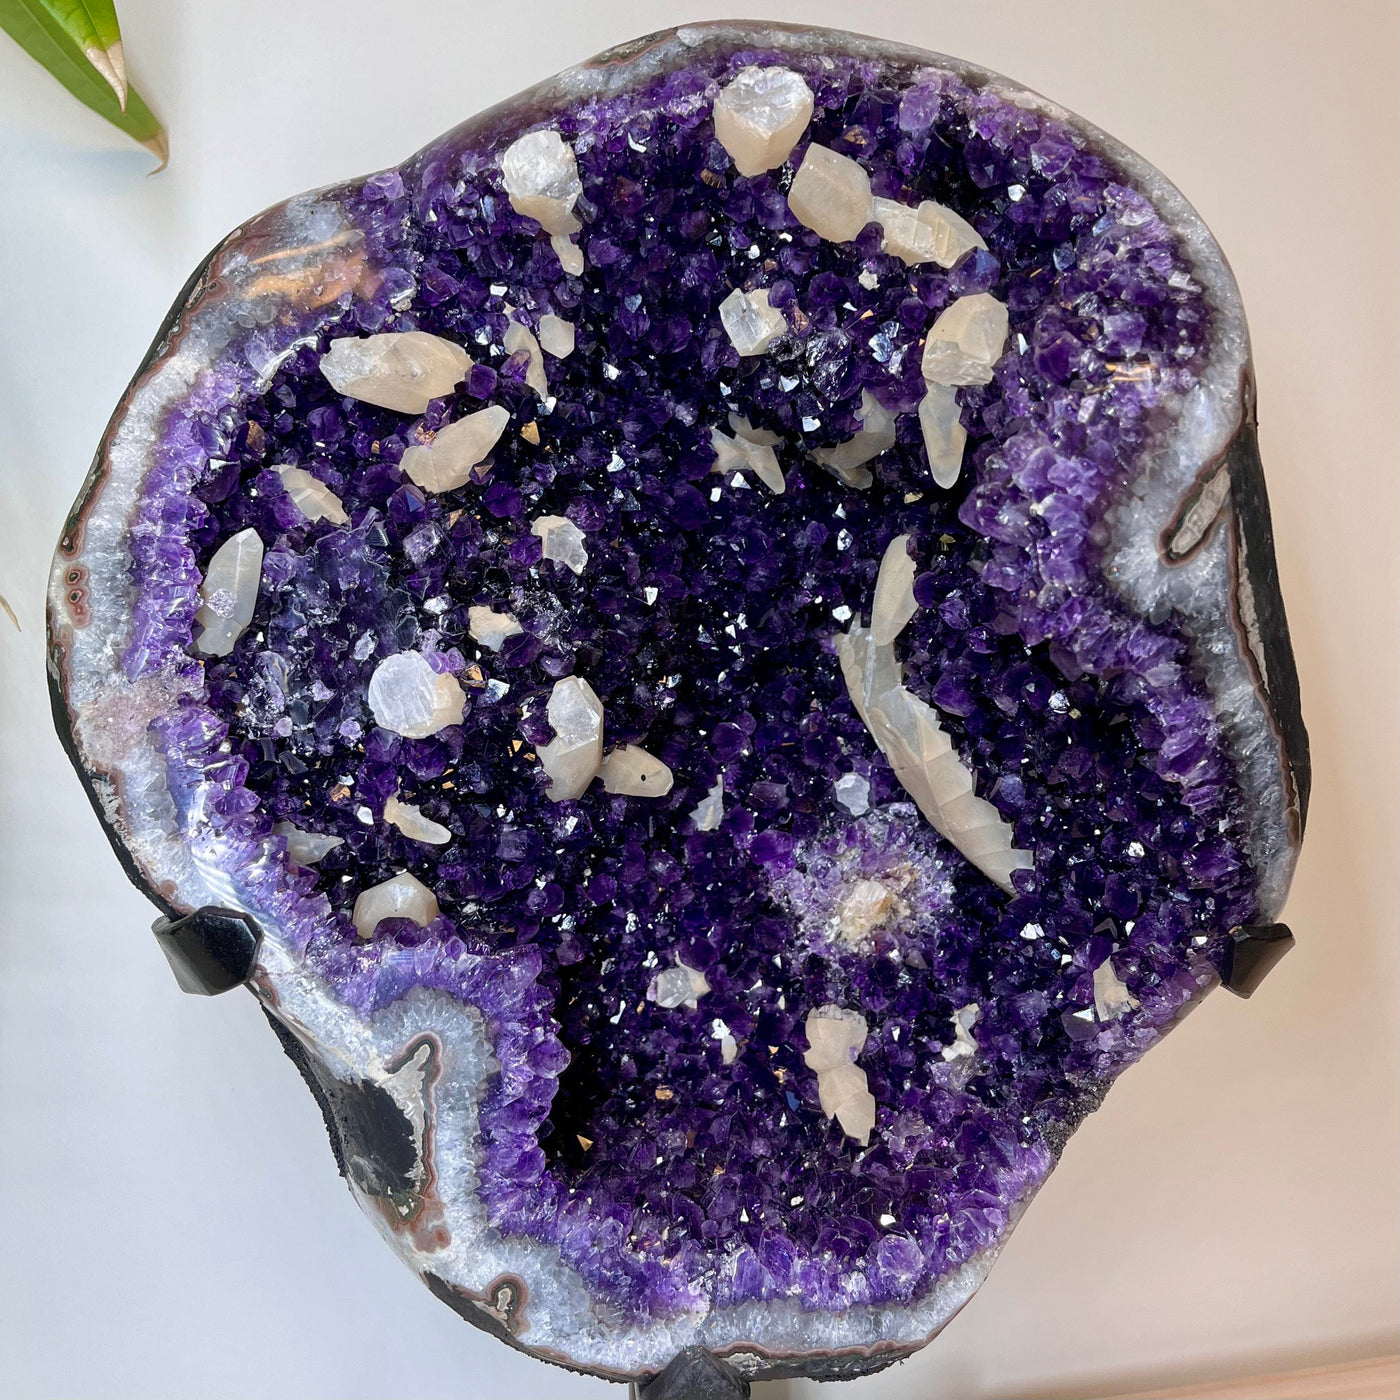 Up close frontal view of Large Dark Purple Amethyst and Calcite Geode.